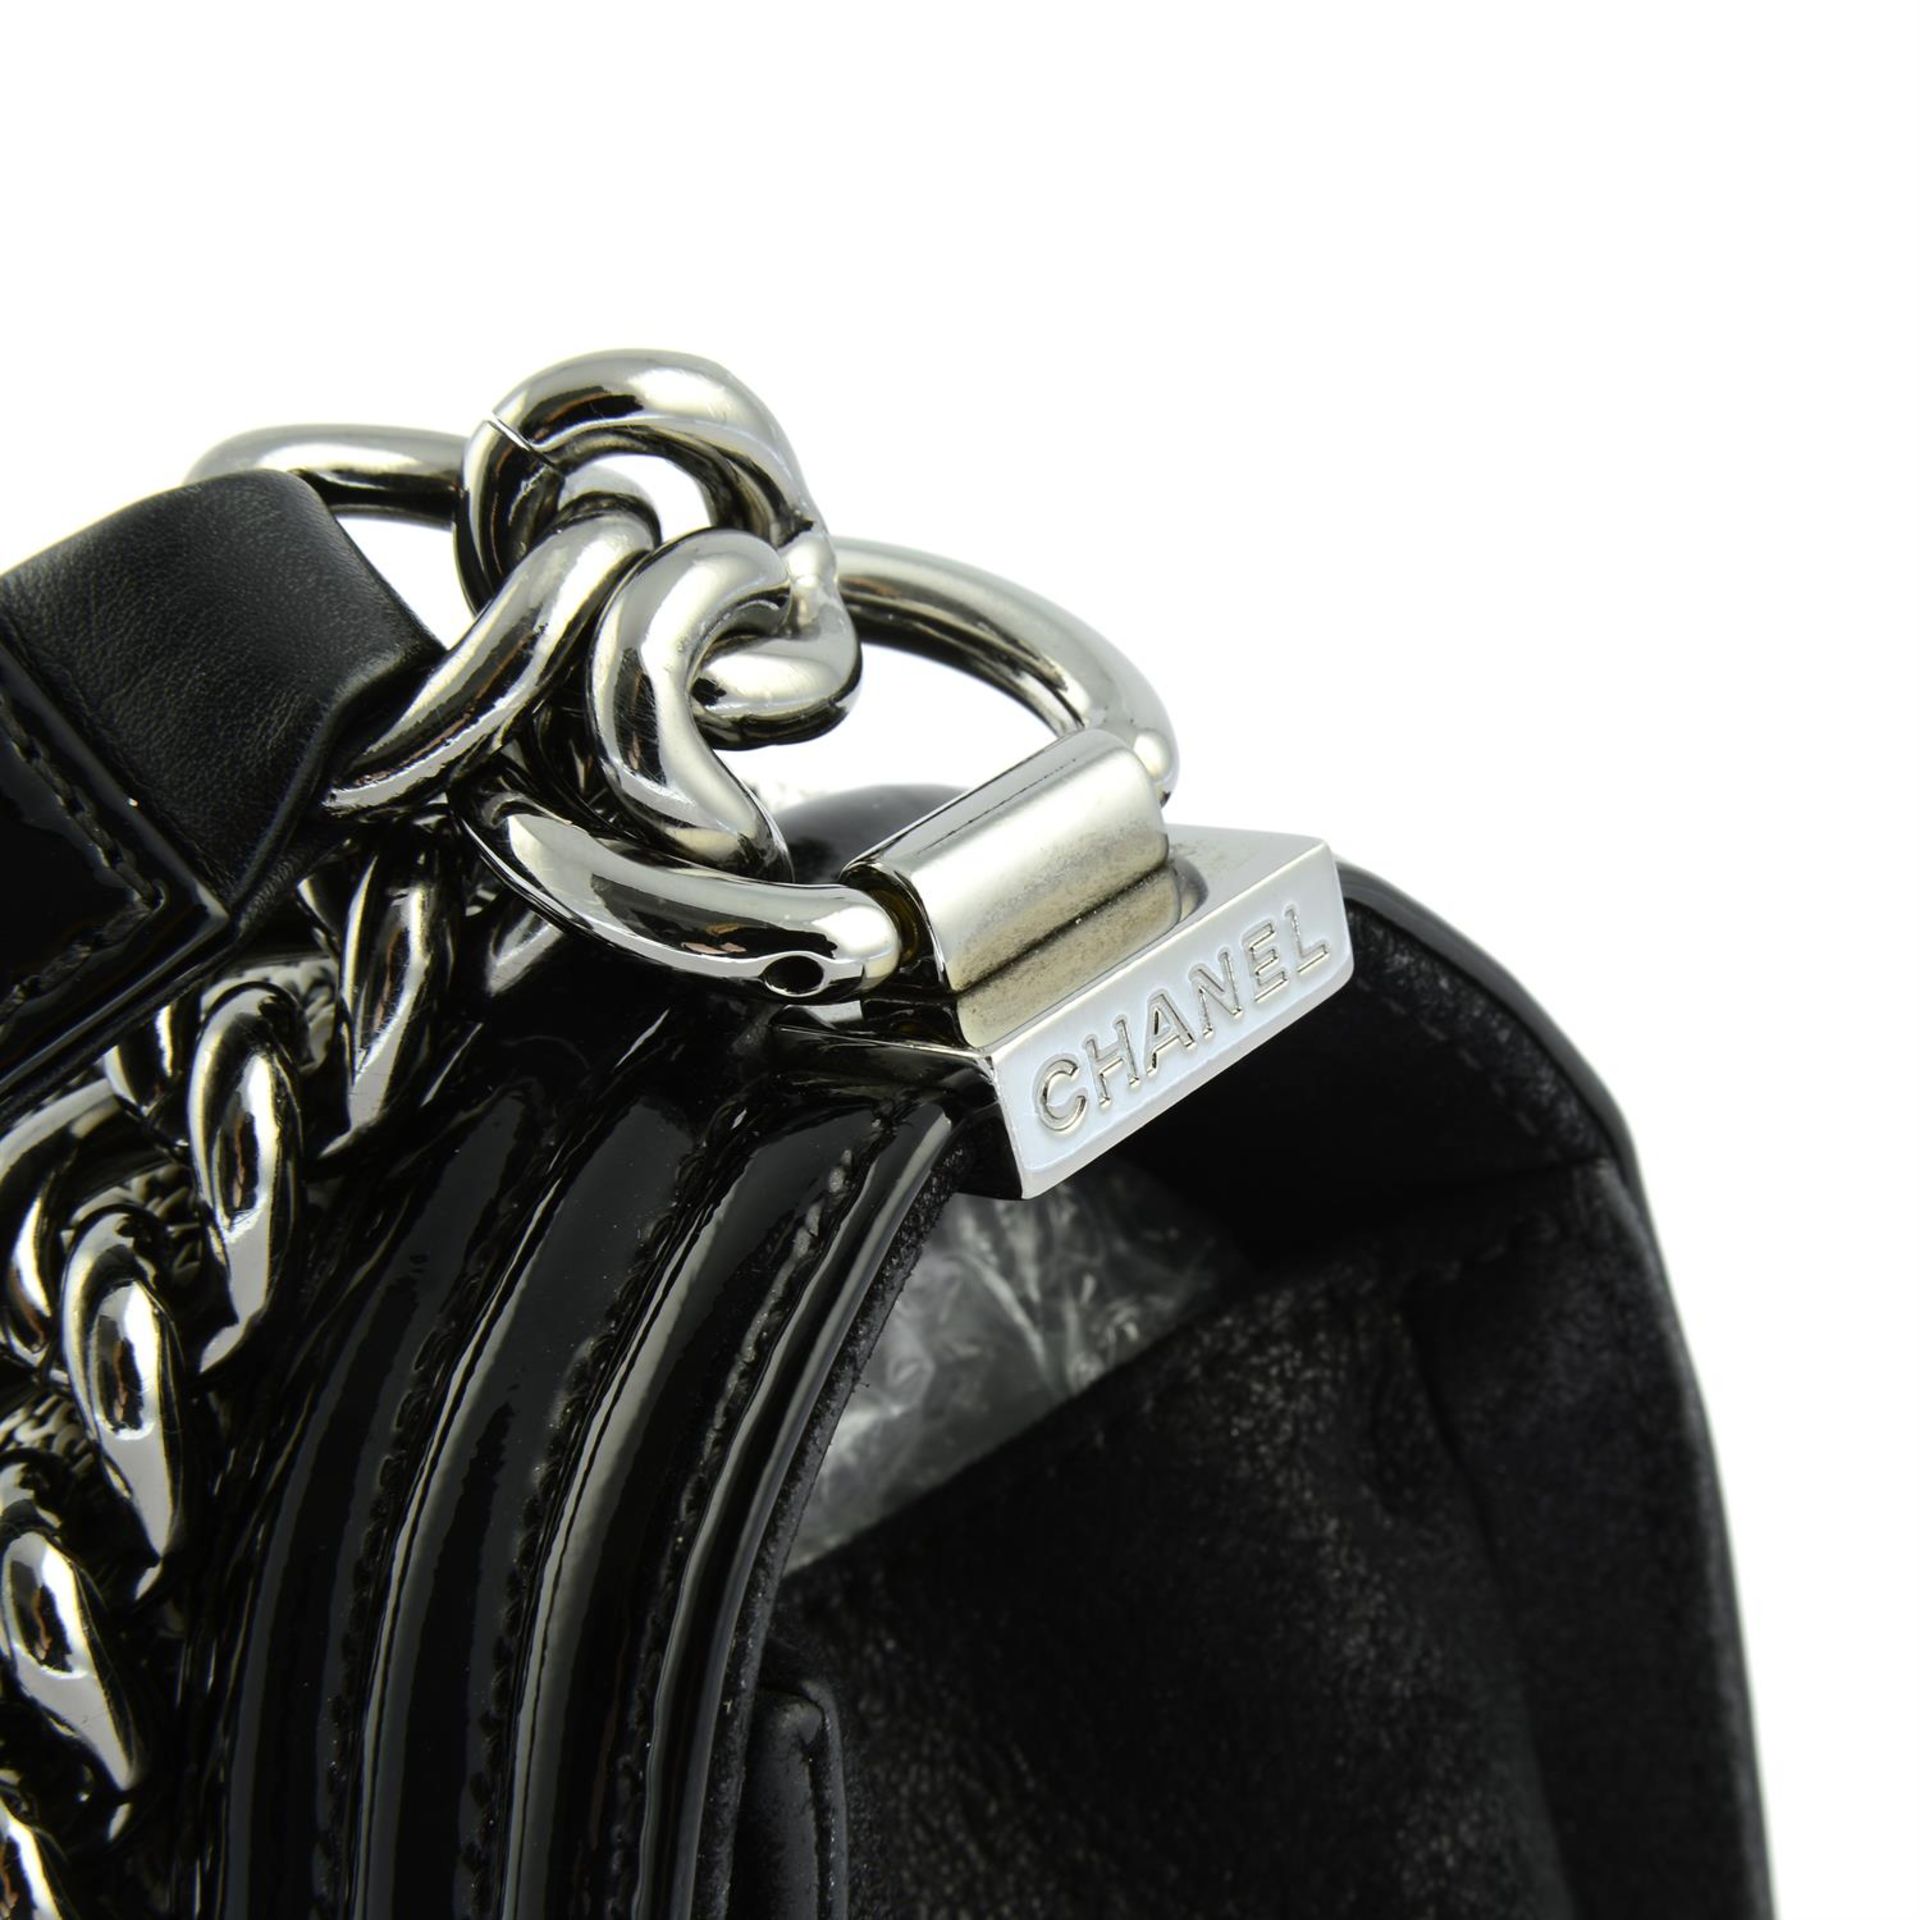 CHANEL- a patent leather sequin boy bag. - Image 5 of 5